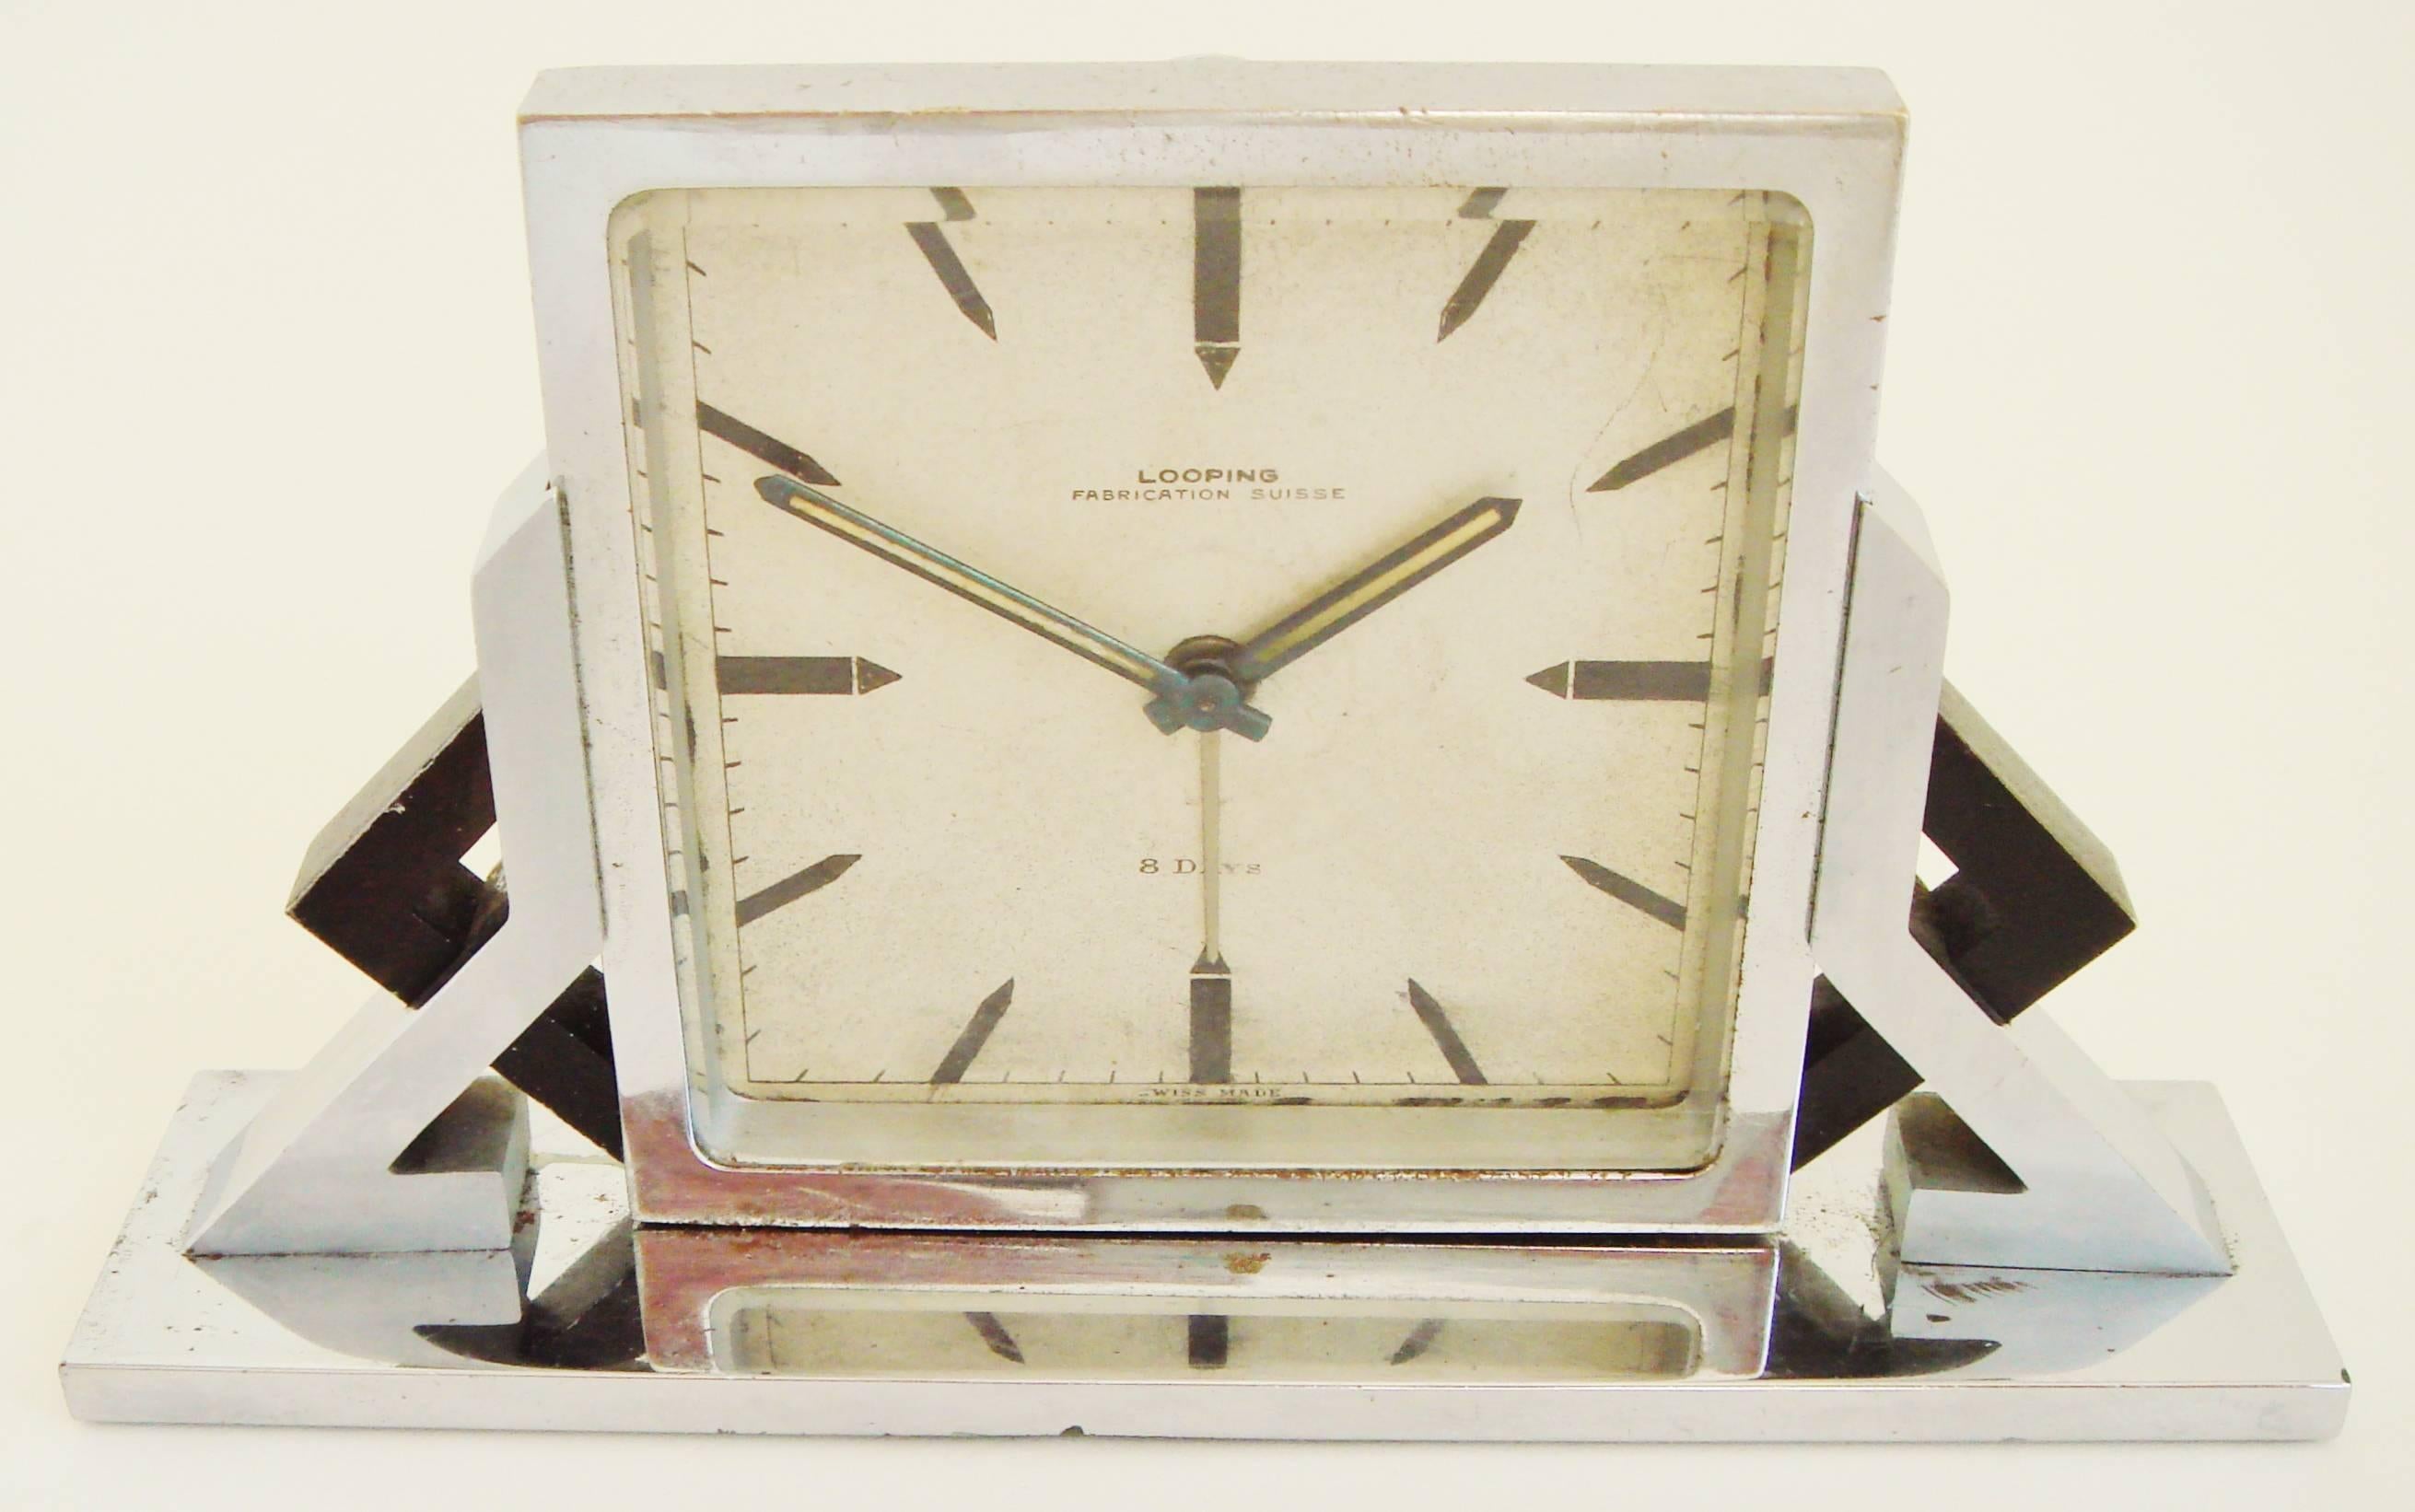 This very stylish geometric Swiss Art Deco 8-day alarm clock juxtaposes jagged shapes in polished chrome, brushed chrome and matte black enamel on either side of the polished chrome bezel. The numerals are represented by black oblongs capped by